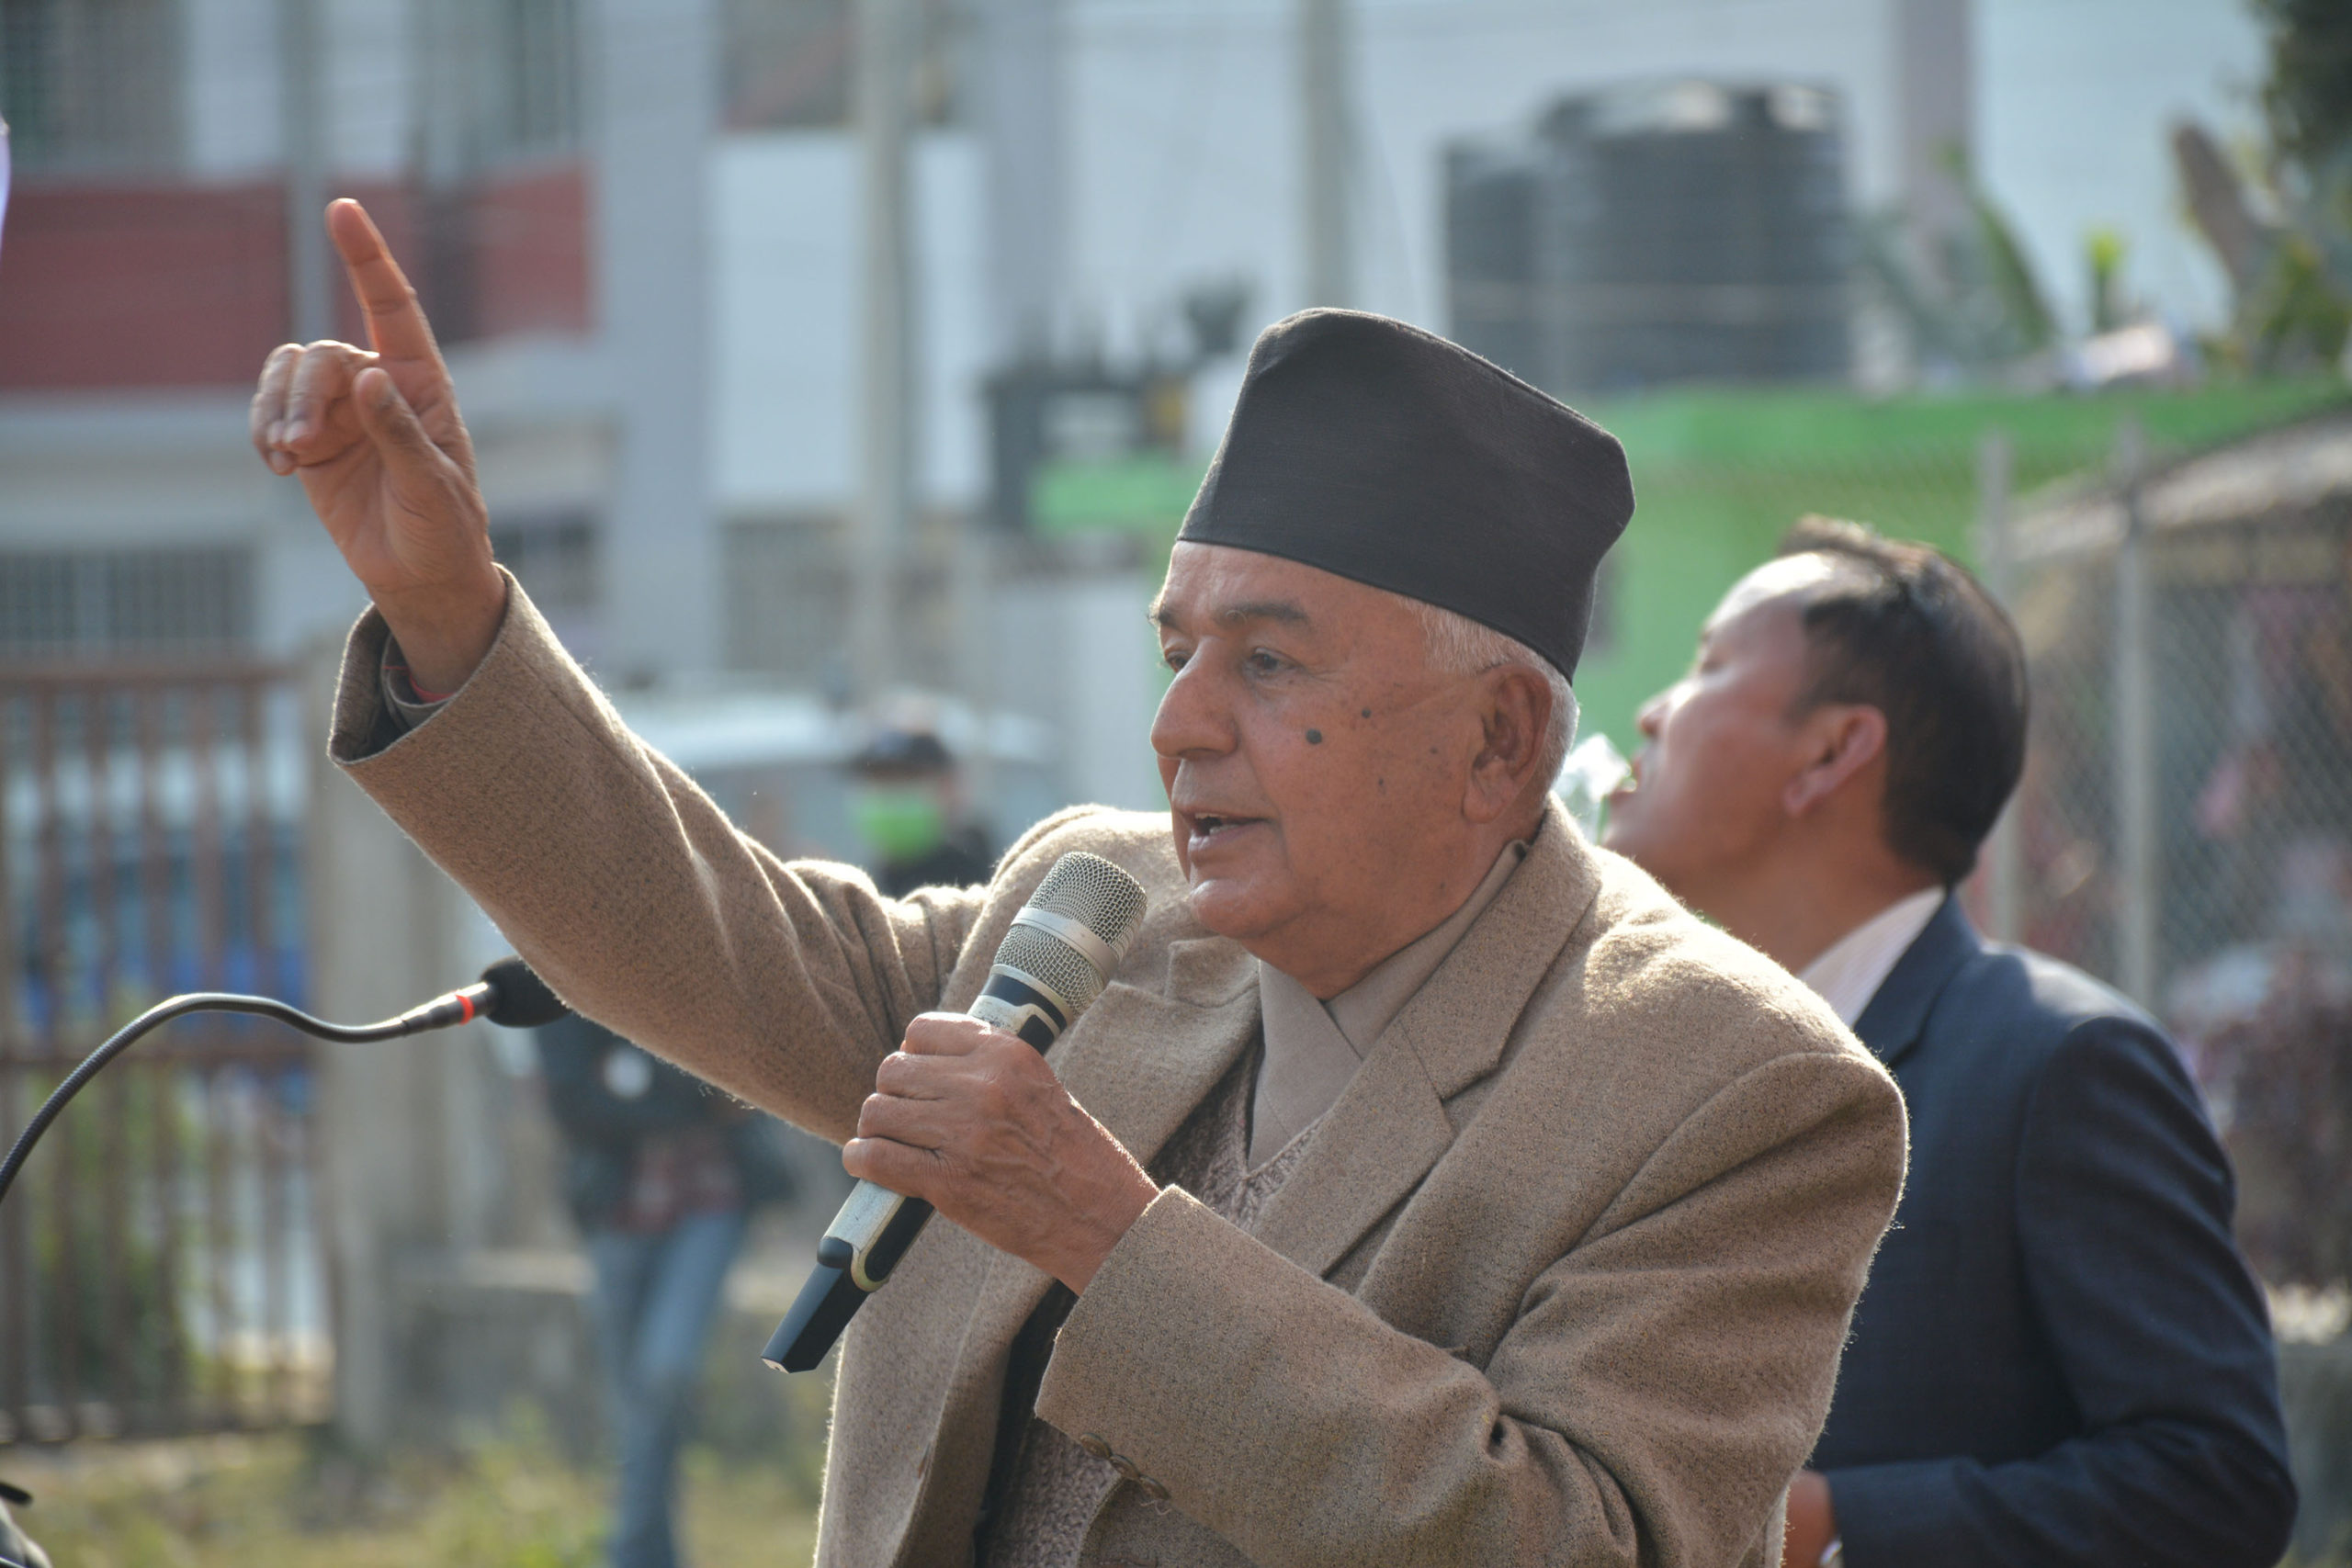 Poudel faction to meet again at 5 pm to decide on a consensus Presidential candidate